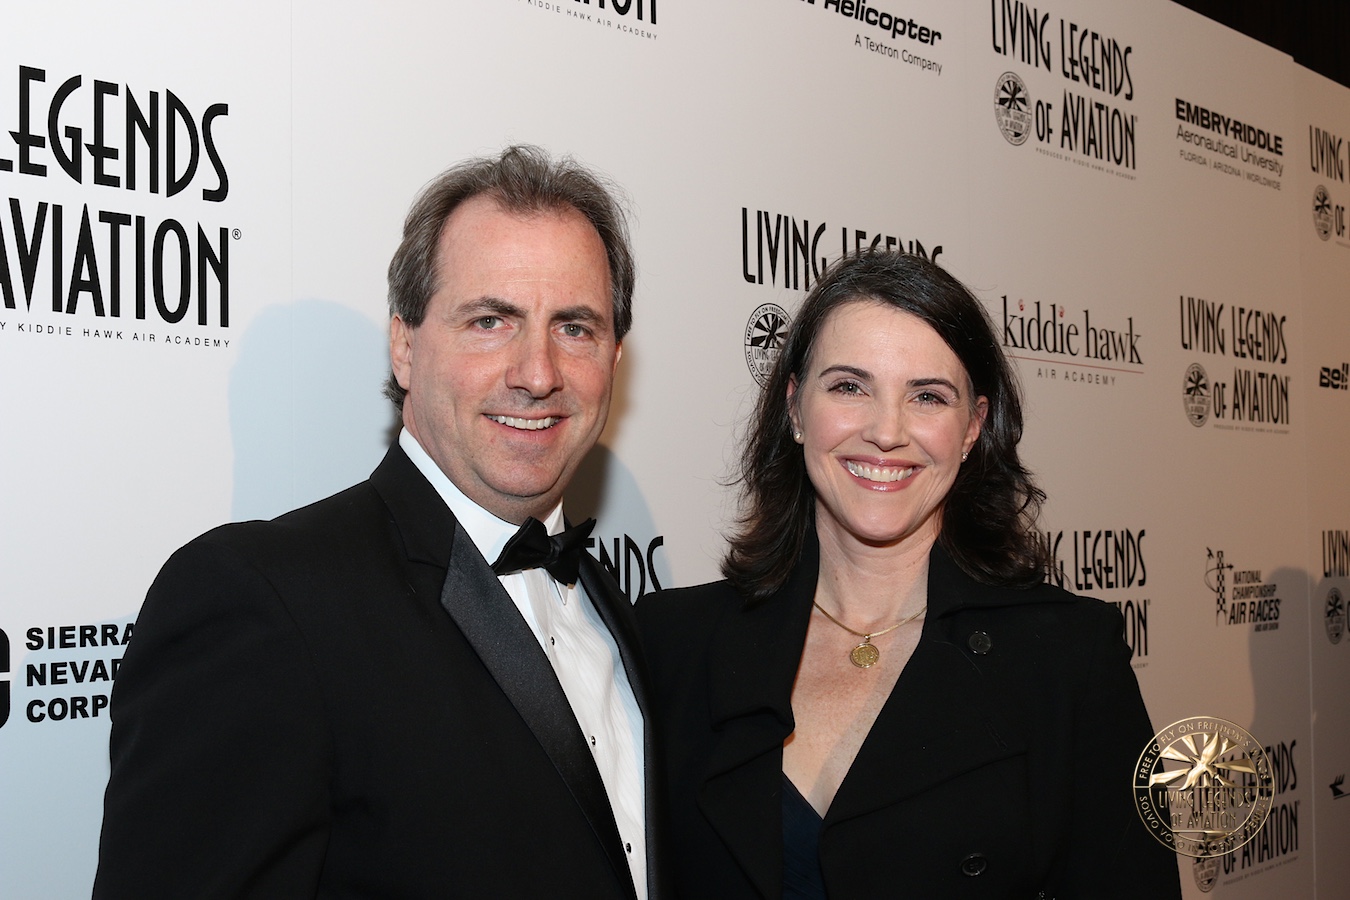 BEVERLY HILLS, CA - JANUARY 16, 2015: Mark McPherson and Kim Furst attend Living Legends of Aviation Gala at the Beverly Hilton.